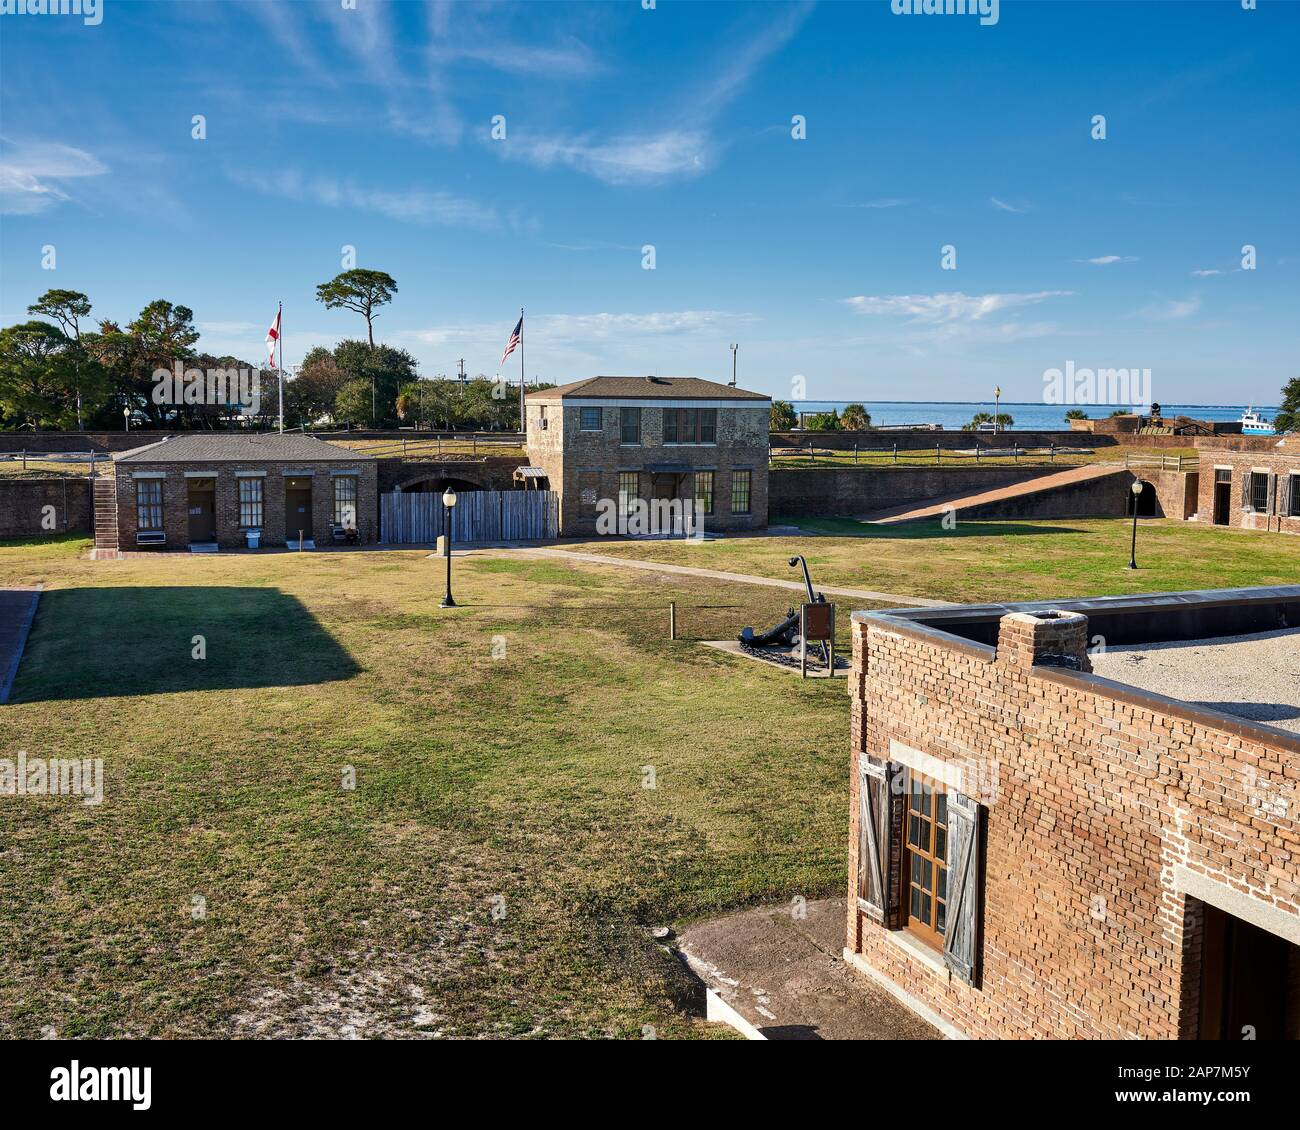 Inside the historic or historical Fort Gaines where the battle of Mobile Bay was fought during the U.S. Civil War, on Dauphin Island Alabama, USA. Stock Photo